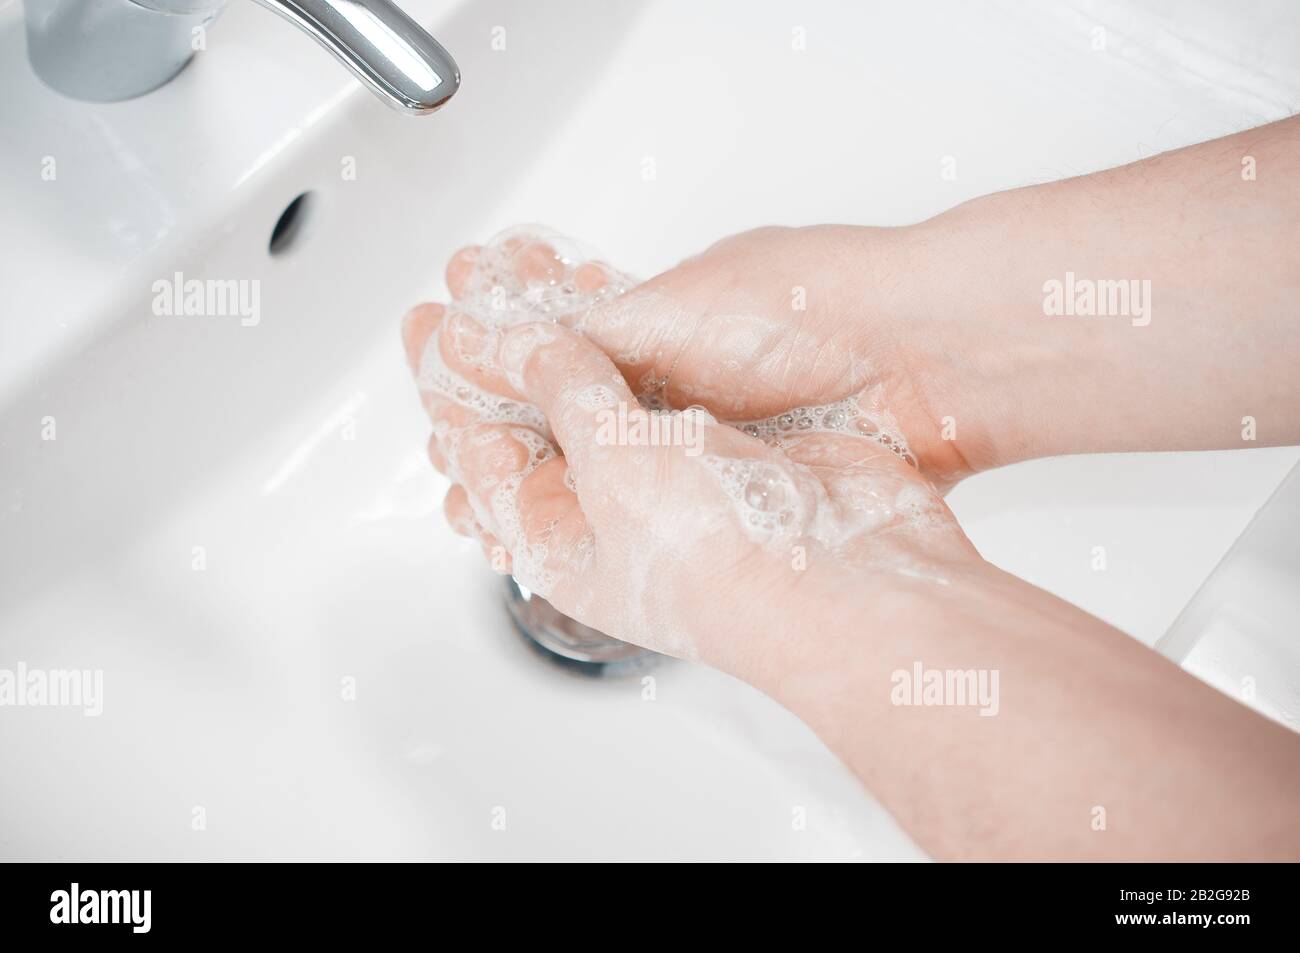 Man wash his hands deeply under a faucet with running water. Hand washing is very important to avoid the risk of contagion from coronavirus and bacter Stock Photo